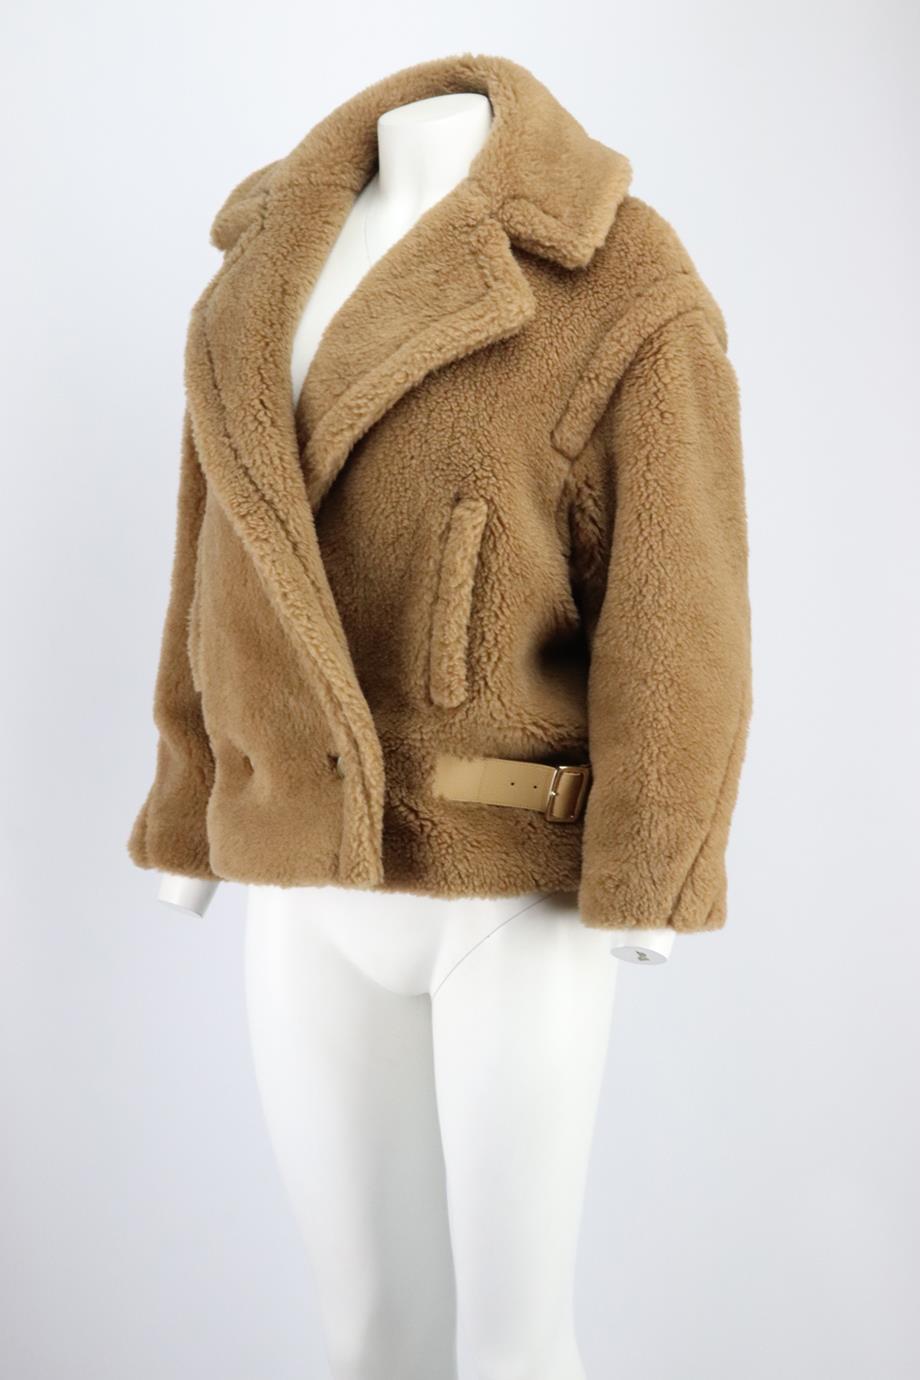 This 'Teddy' jacket by Max Mara was such a hit when it first launched in 2013 that it was reissued again and again - this oversized cropped style is made from camel hair woven with touches of silk for a super soft handle with ‘1951’ detail on the